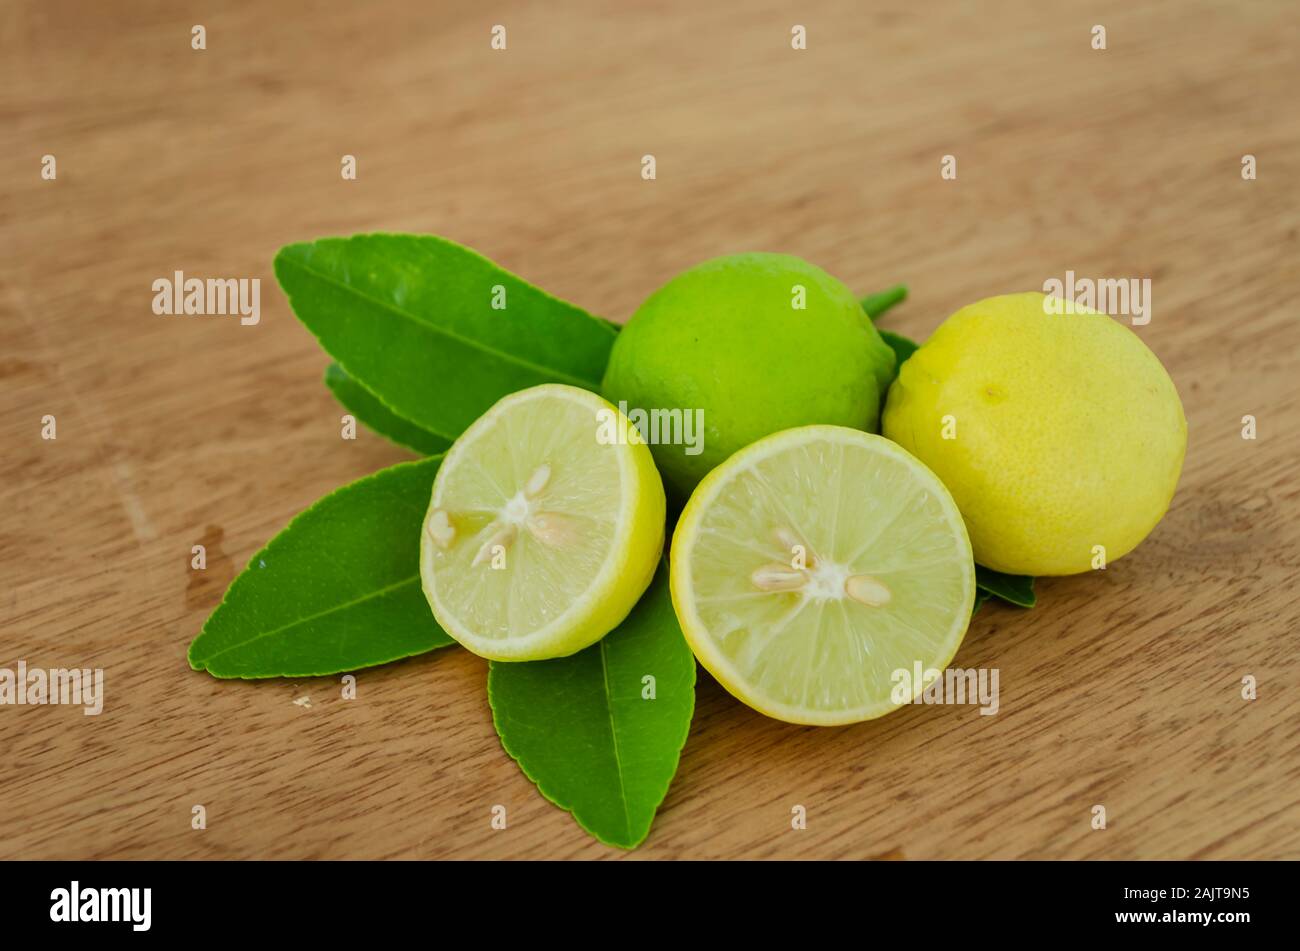 Whole And Cut Key Lime And Leaves On A Board Table Stock Photo